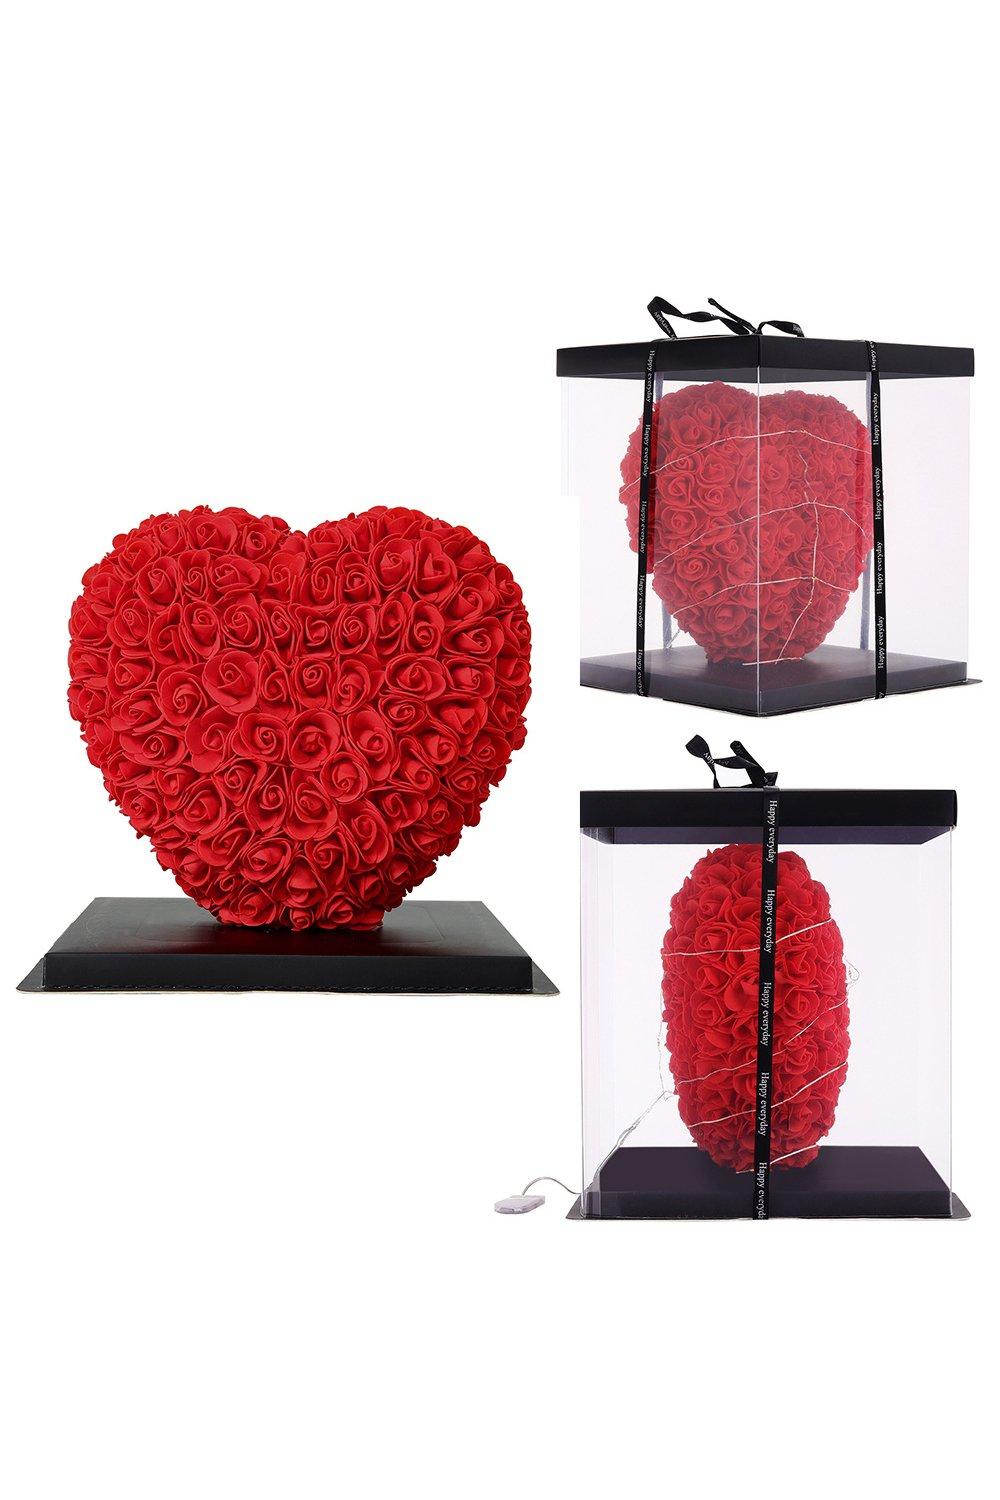 Rose Heart Gift Box with LED Lights for Valentine's Day